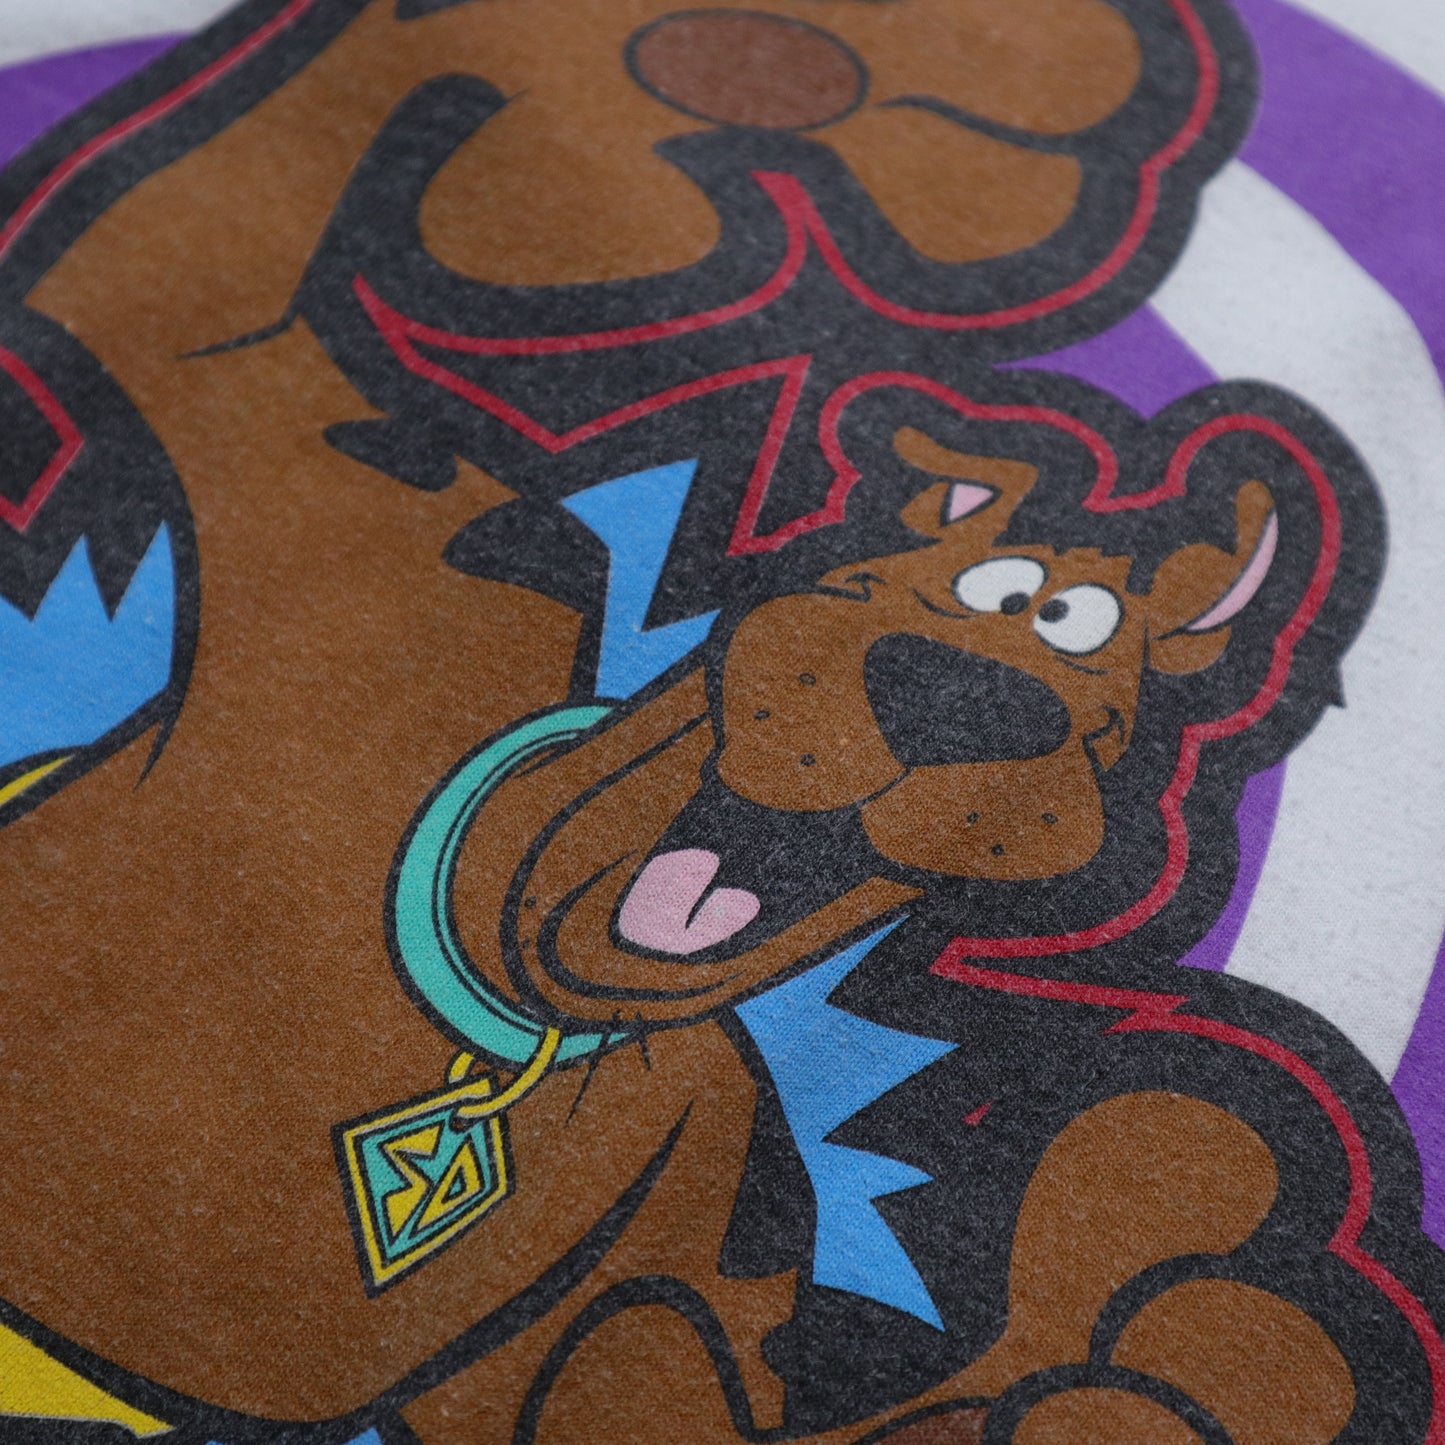 90-00s Scooby Dog T-shirt vintage tee